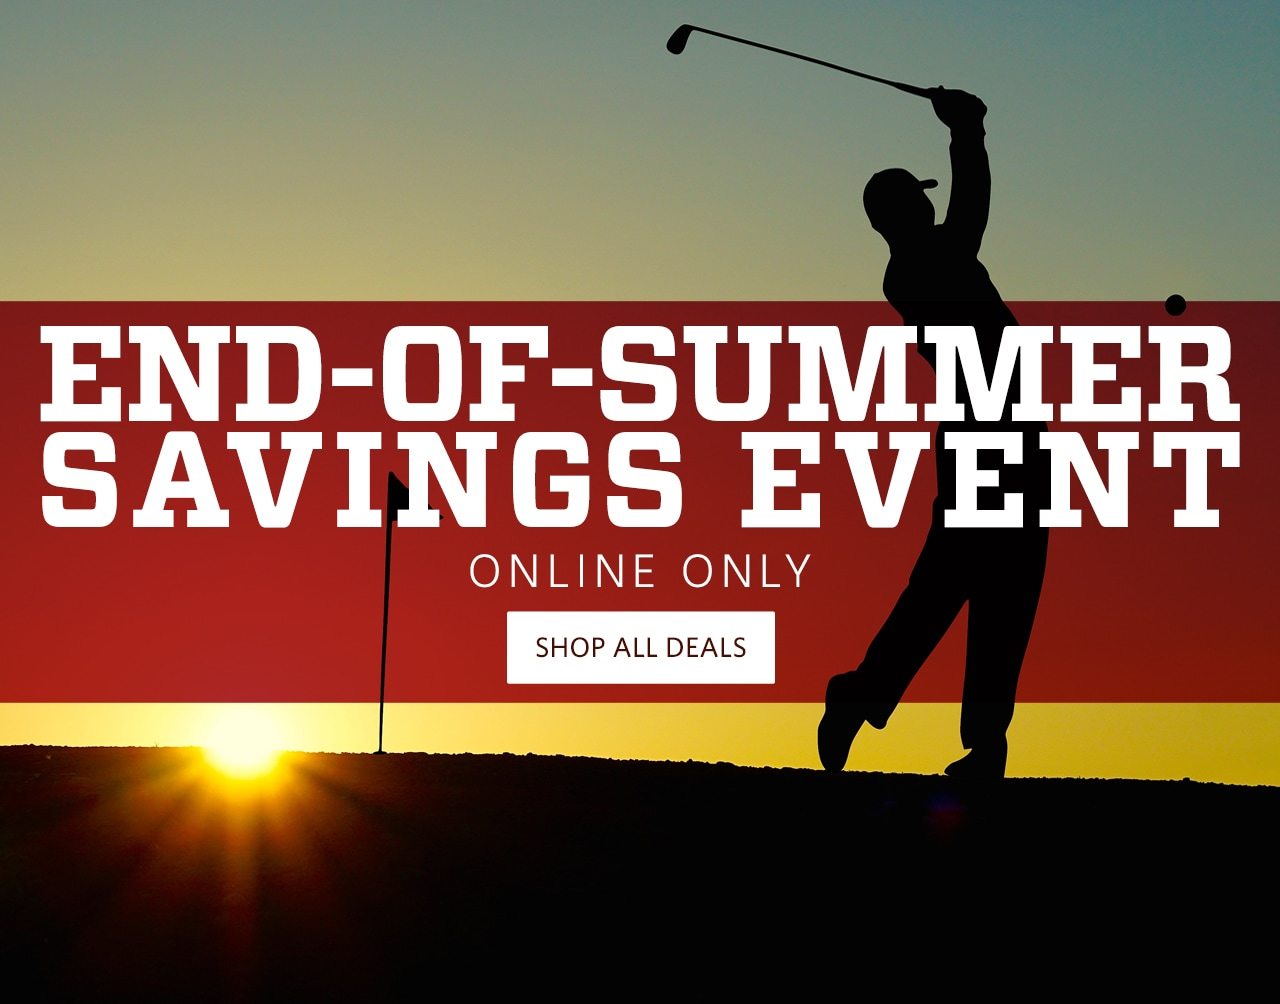 End of Summer Savings Event. Online Only. Shop All Deals.